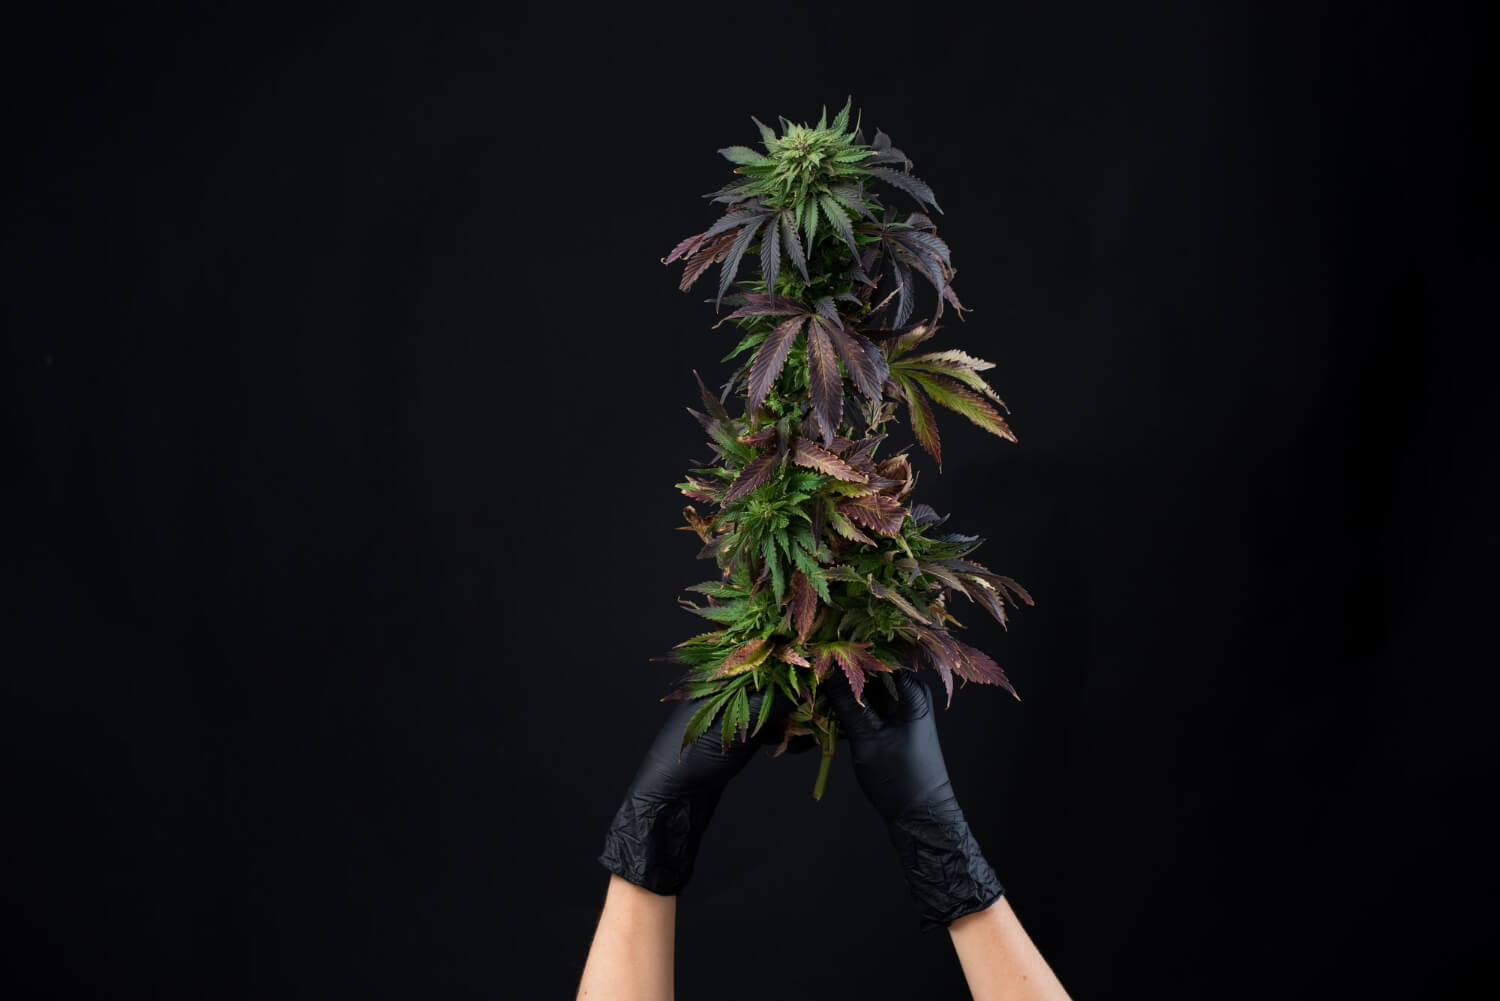 Selecting The Right Gloves in the Cannabis Industry